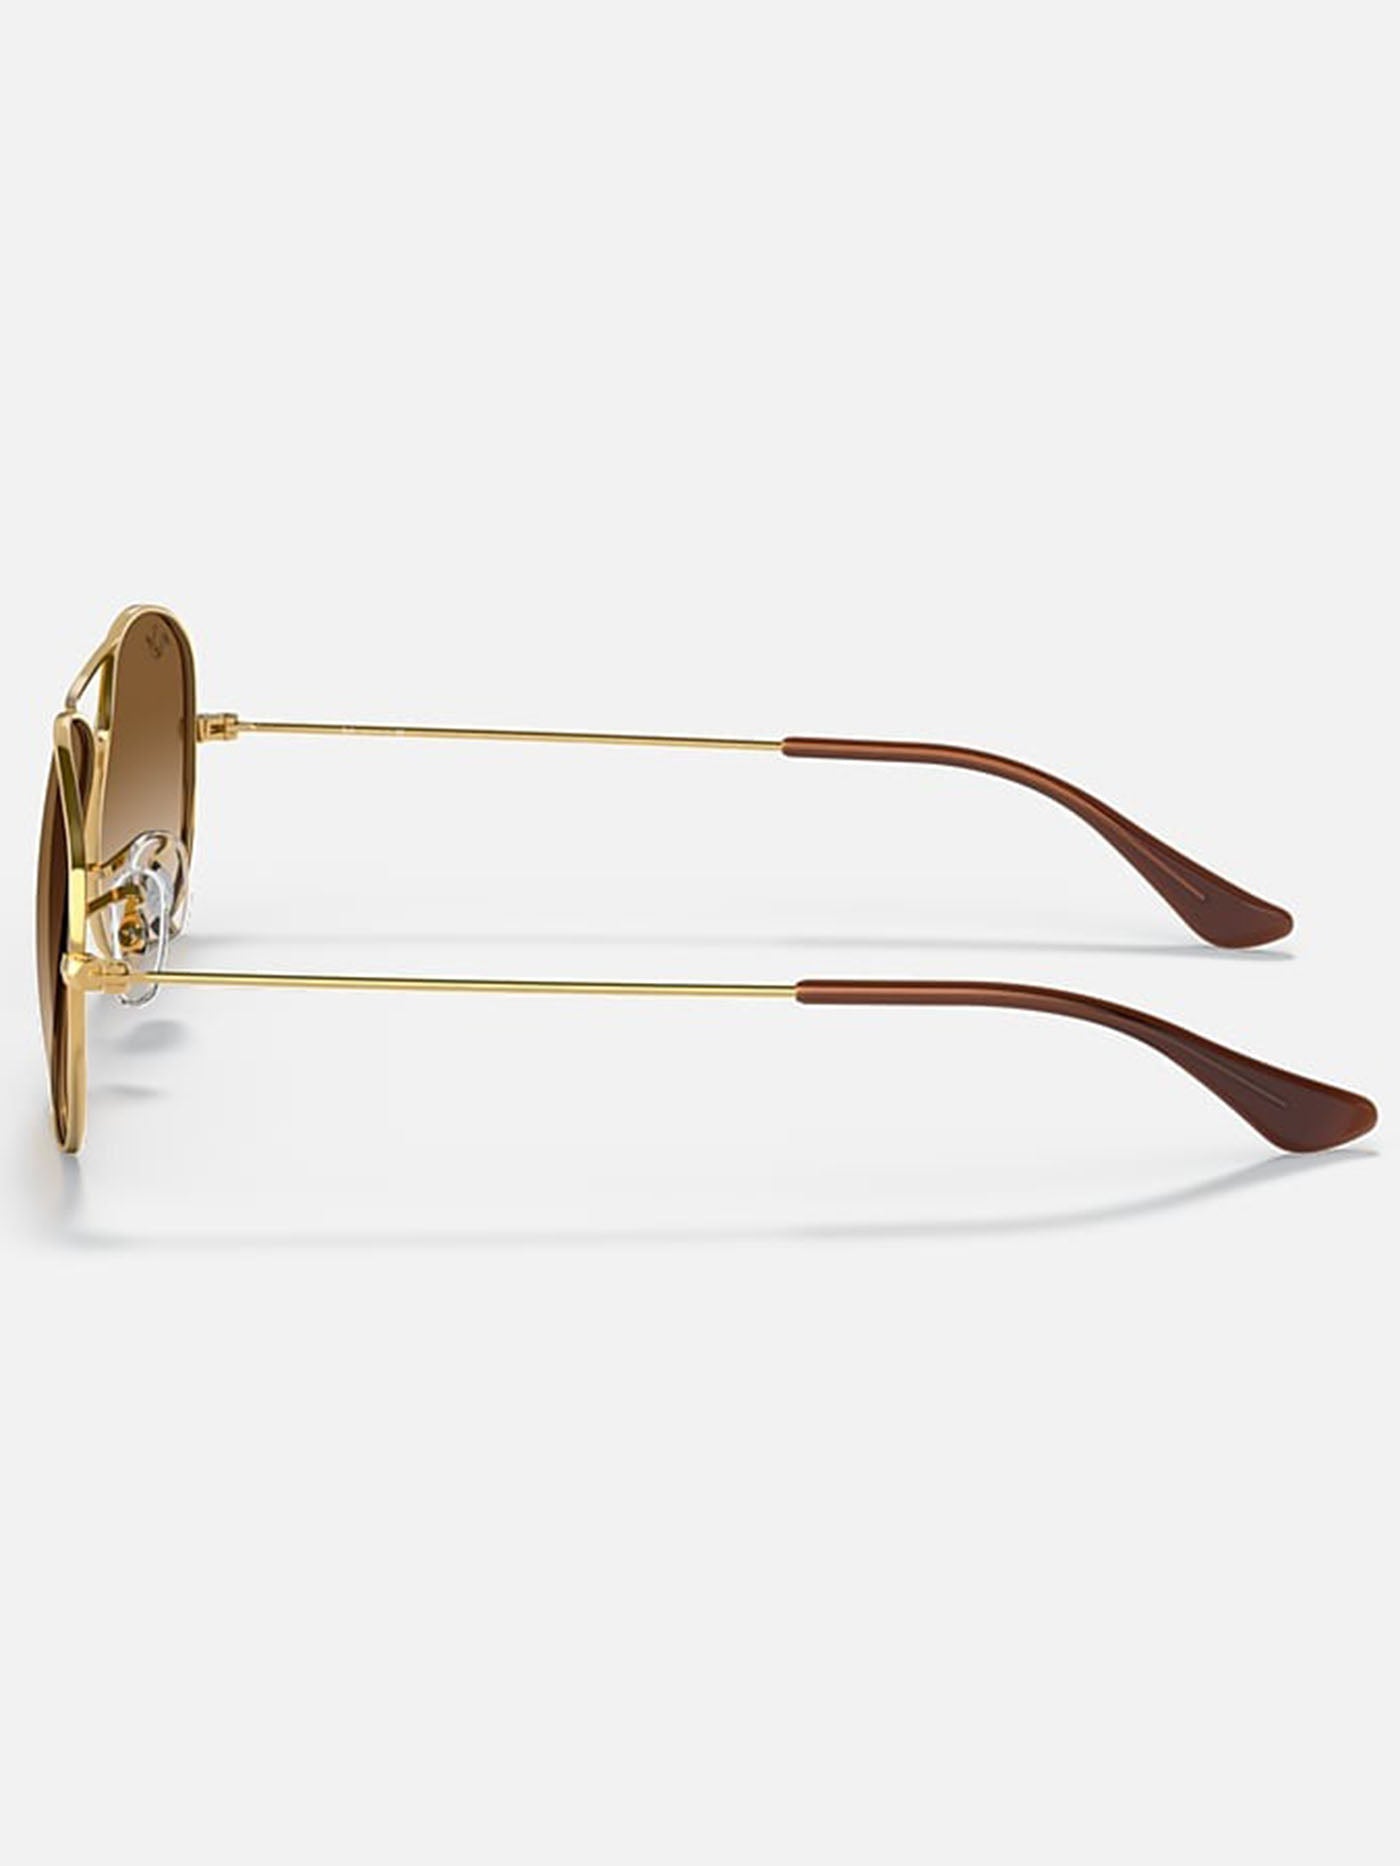 Ray Ban 2024 Cockpit Gold/Brown Gradient Sunglasses